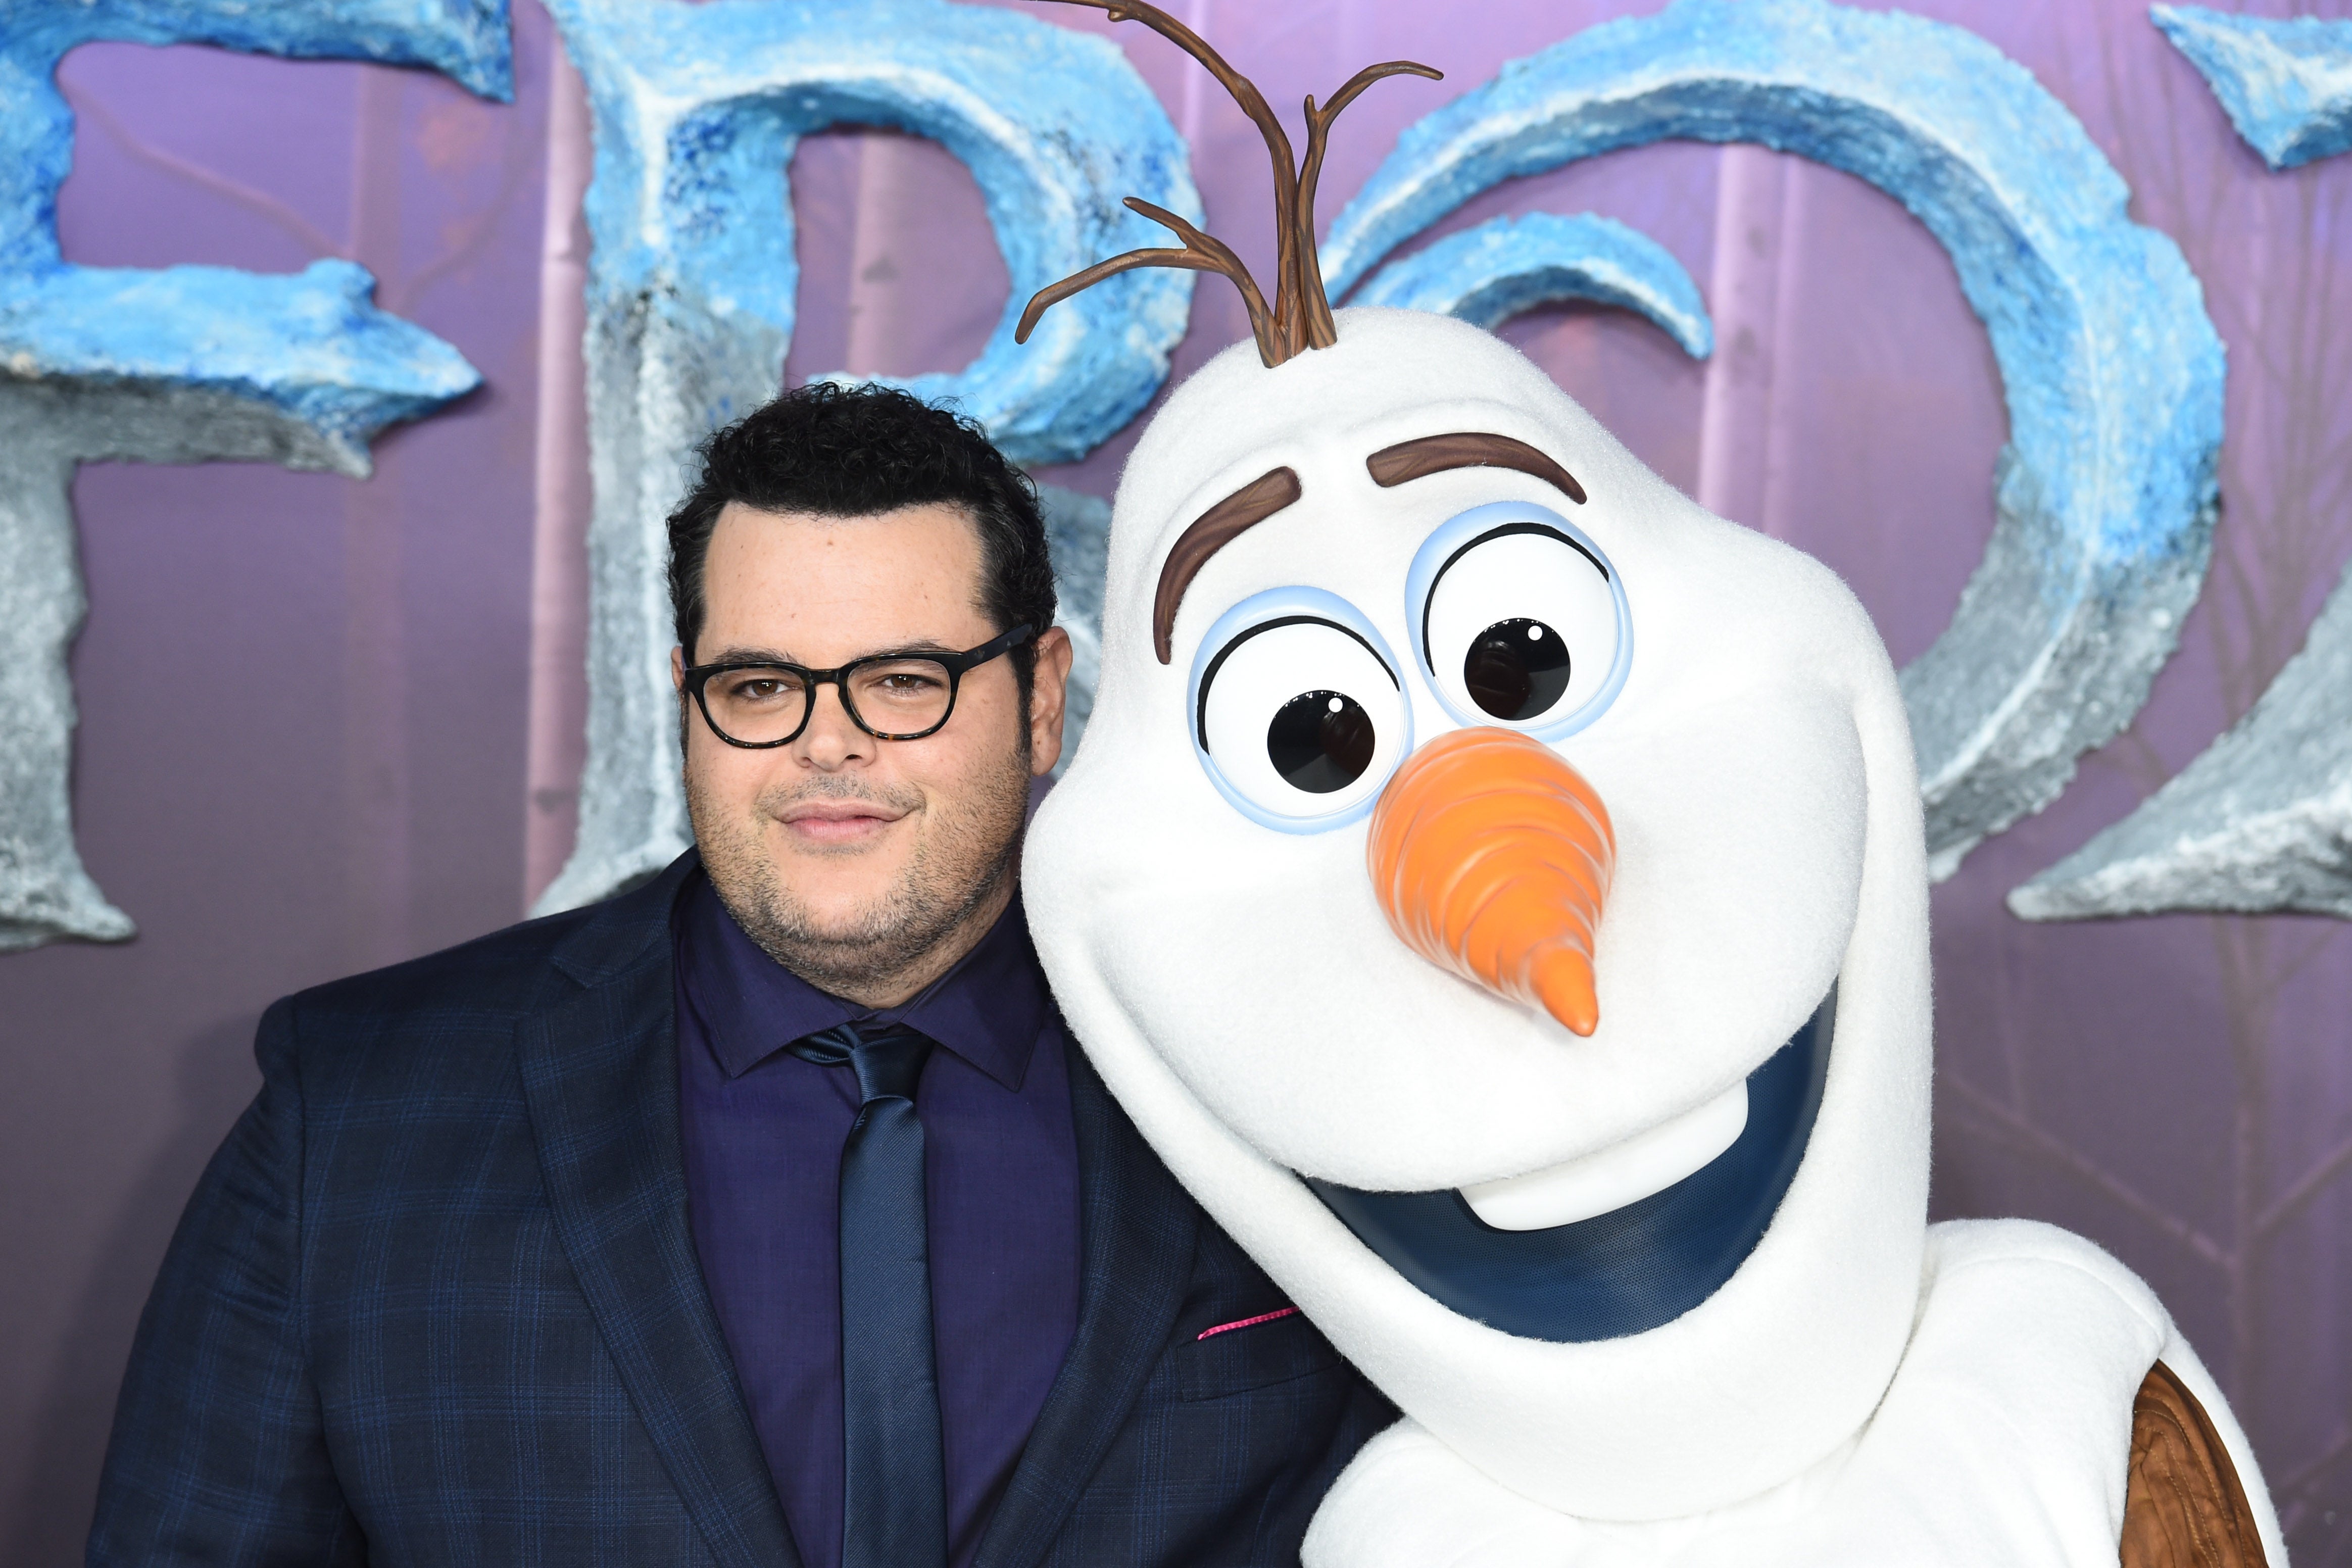 With his on-screen alter-ego, ‘Frozen’’s Olaf